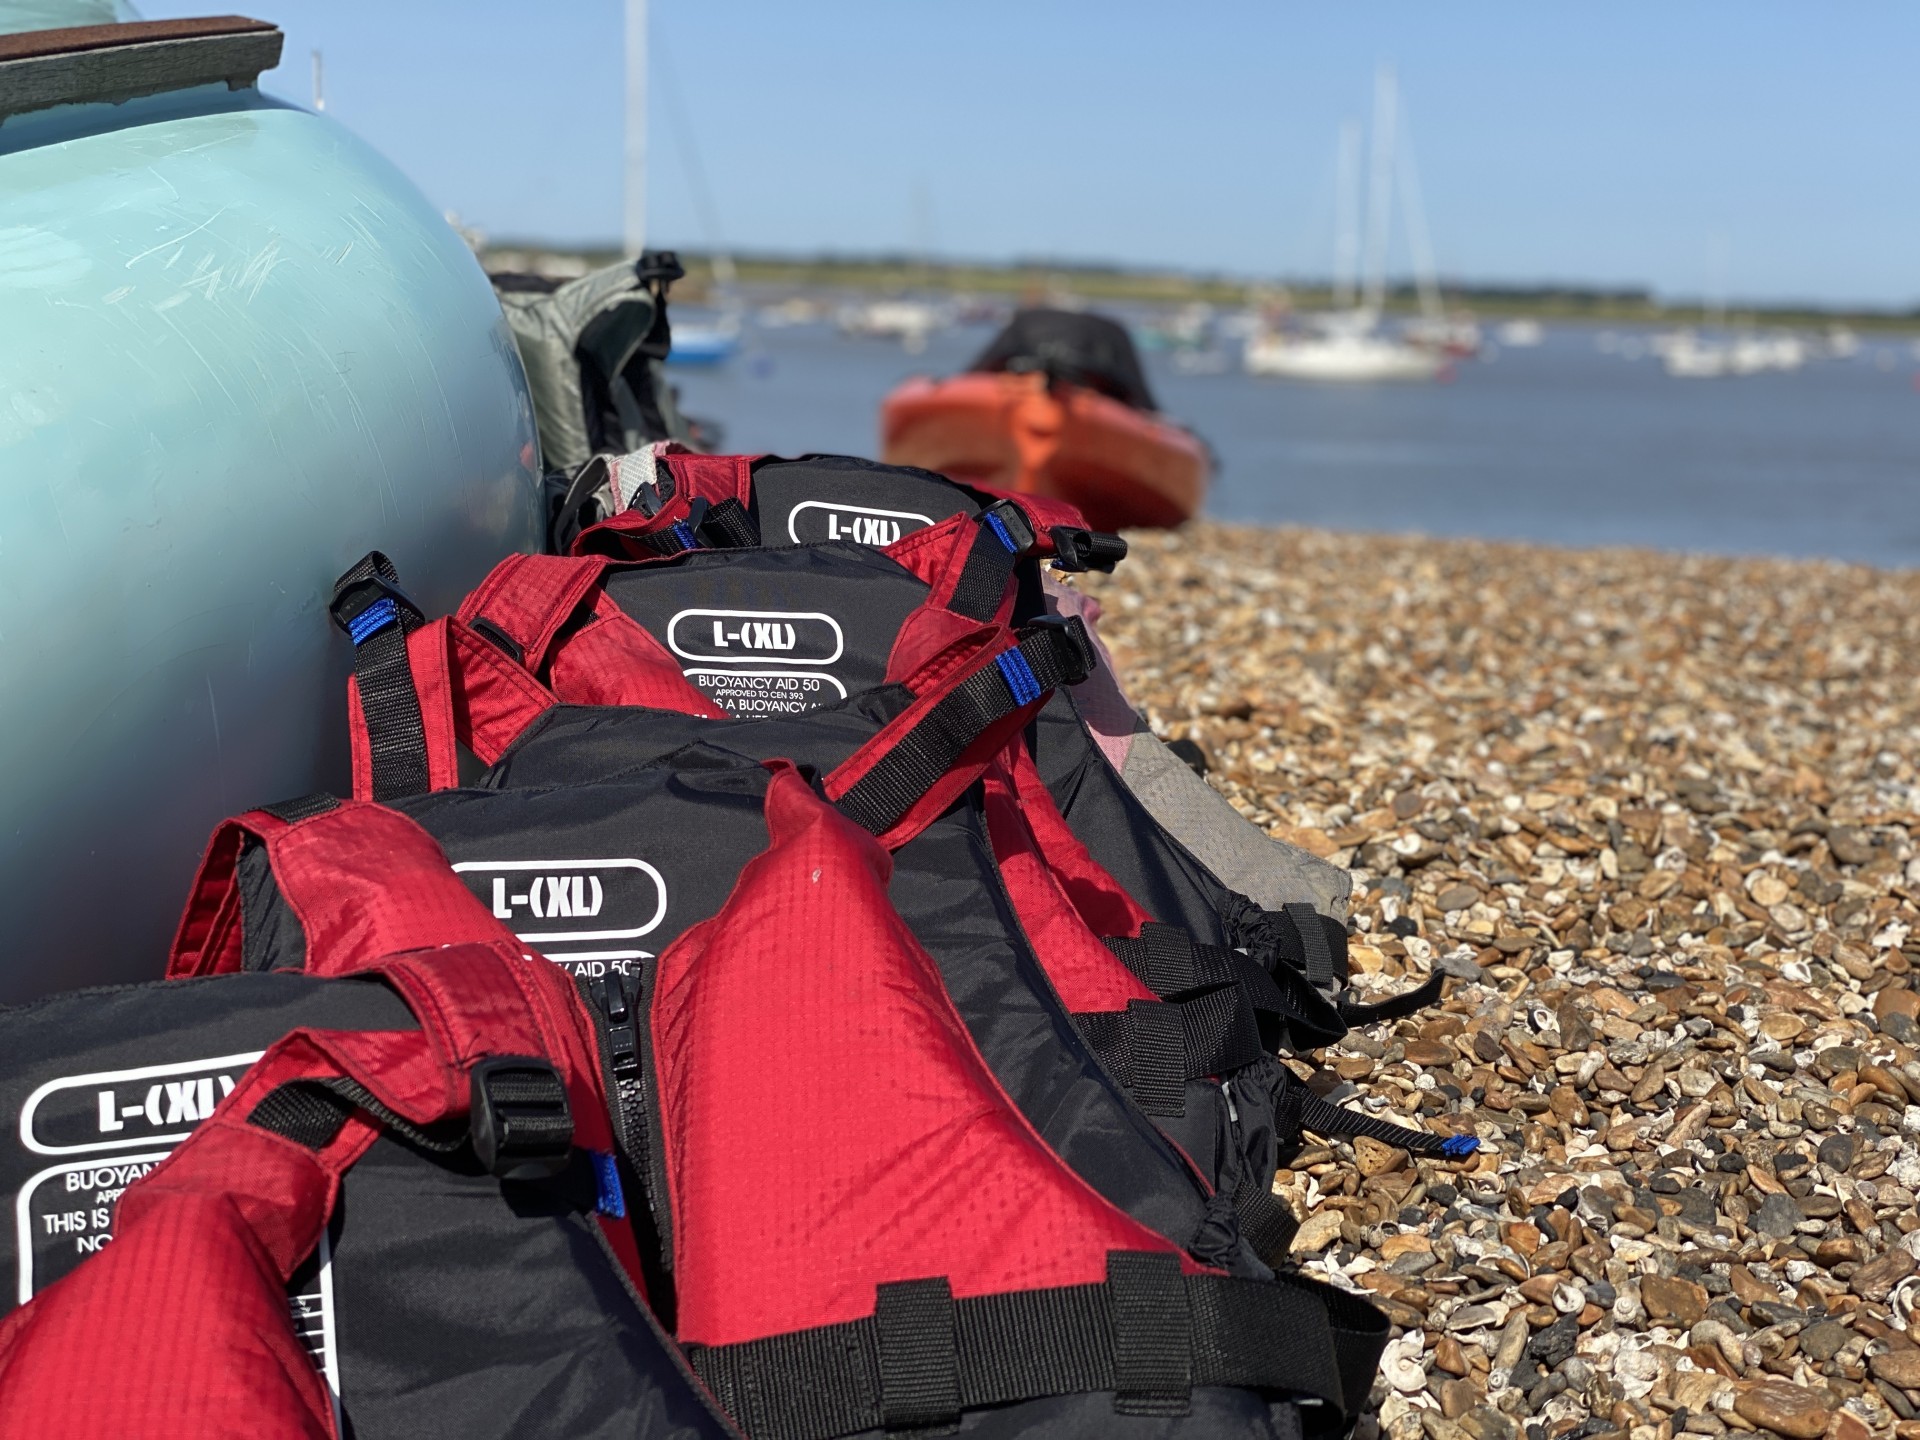 Red buoyancy aids lined neatly on a shingle beach, ready for use.